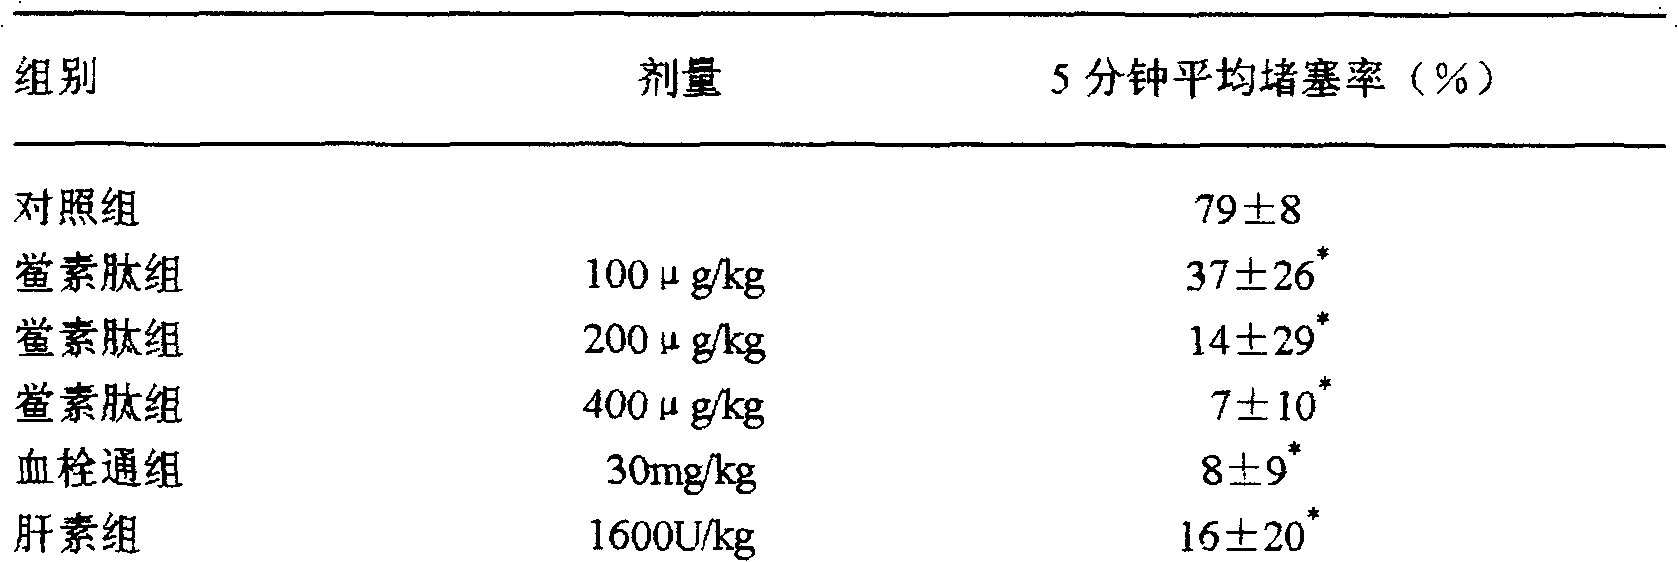 Application of tachyplesin in preparing antihrombotic medicines and health-care products and preparation method thereof